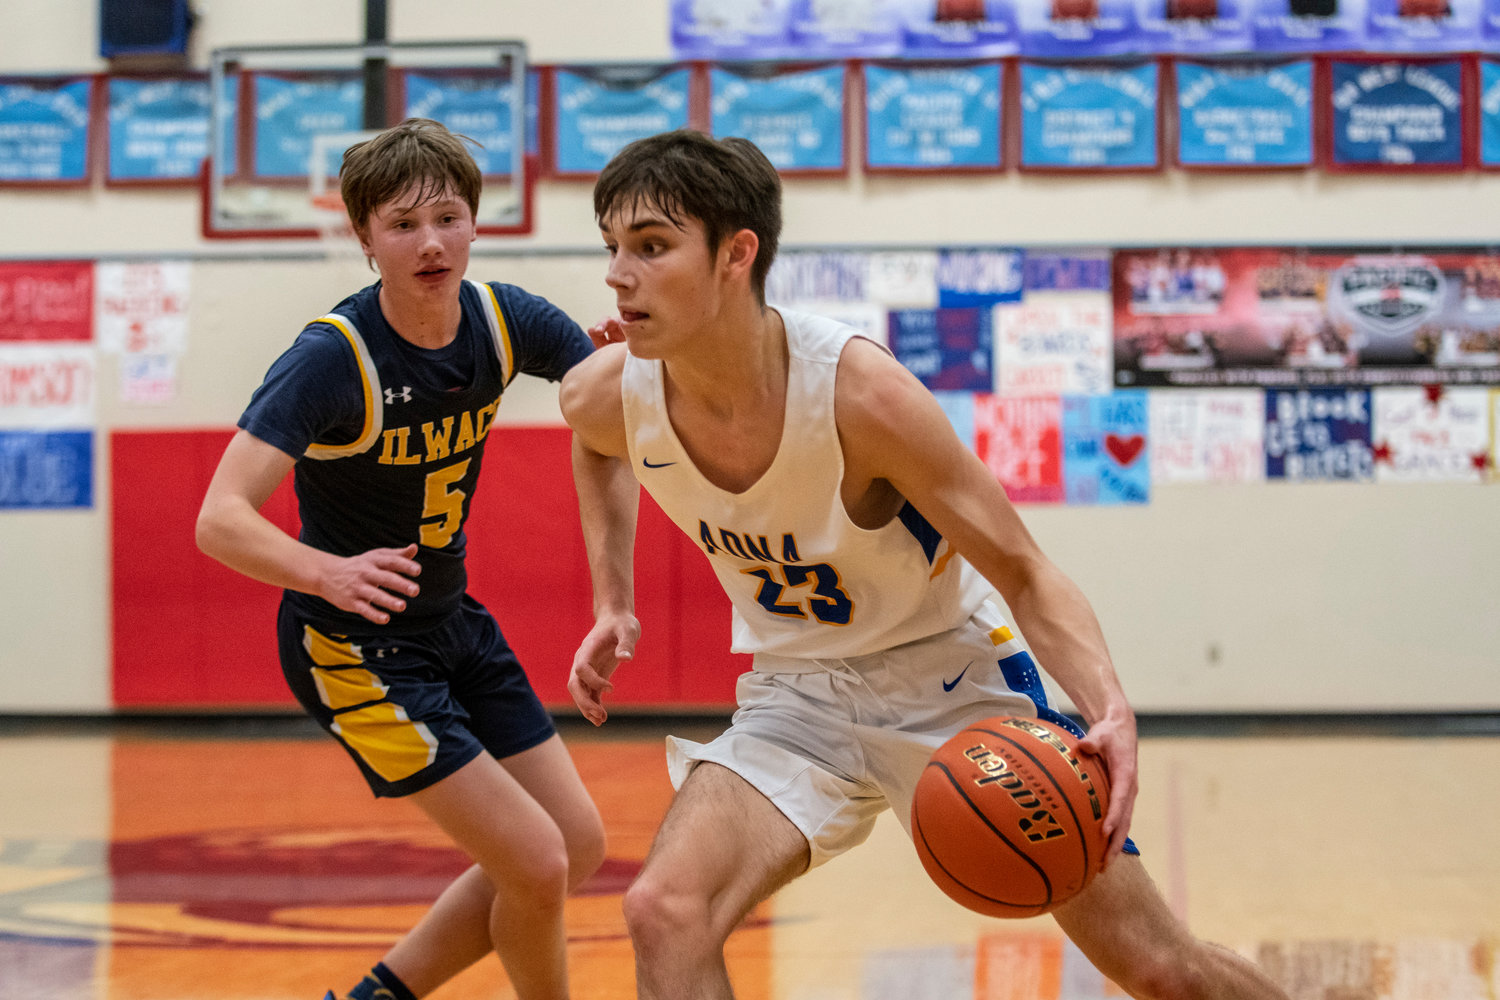 Adna junior Eli Smith (23) drives against Ilwaco's Ethan Hopkins (5) during the Jack Q. Pearson Holiday Classic in Menlo on Dec. 29.